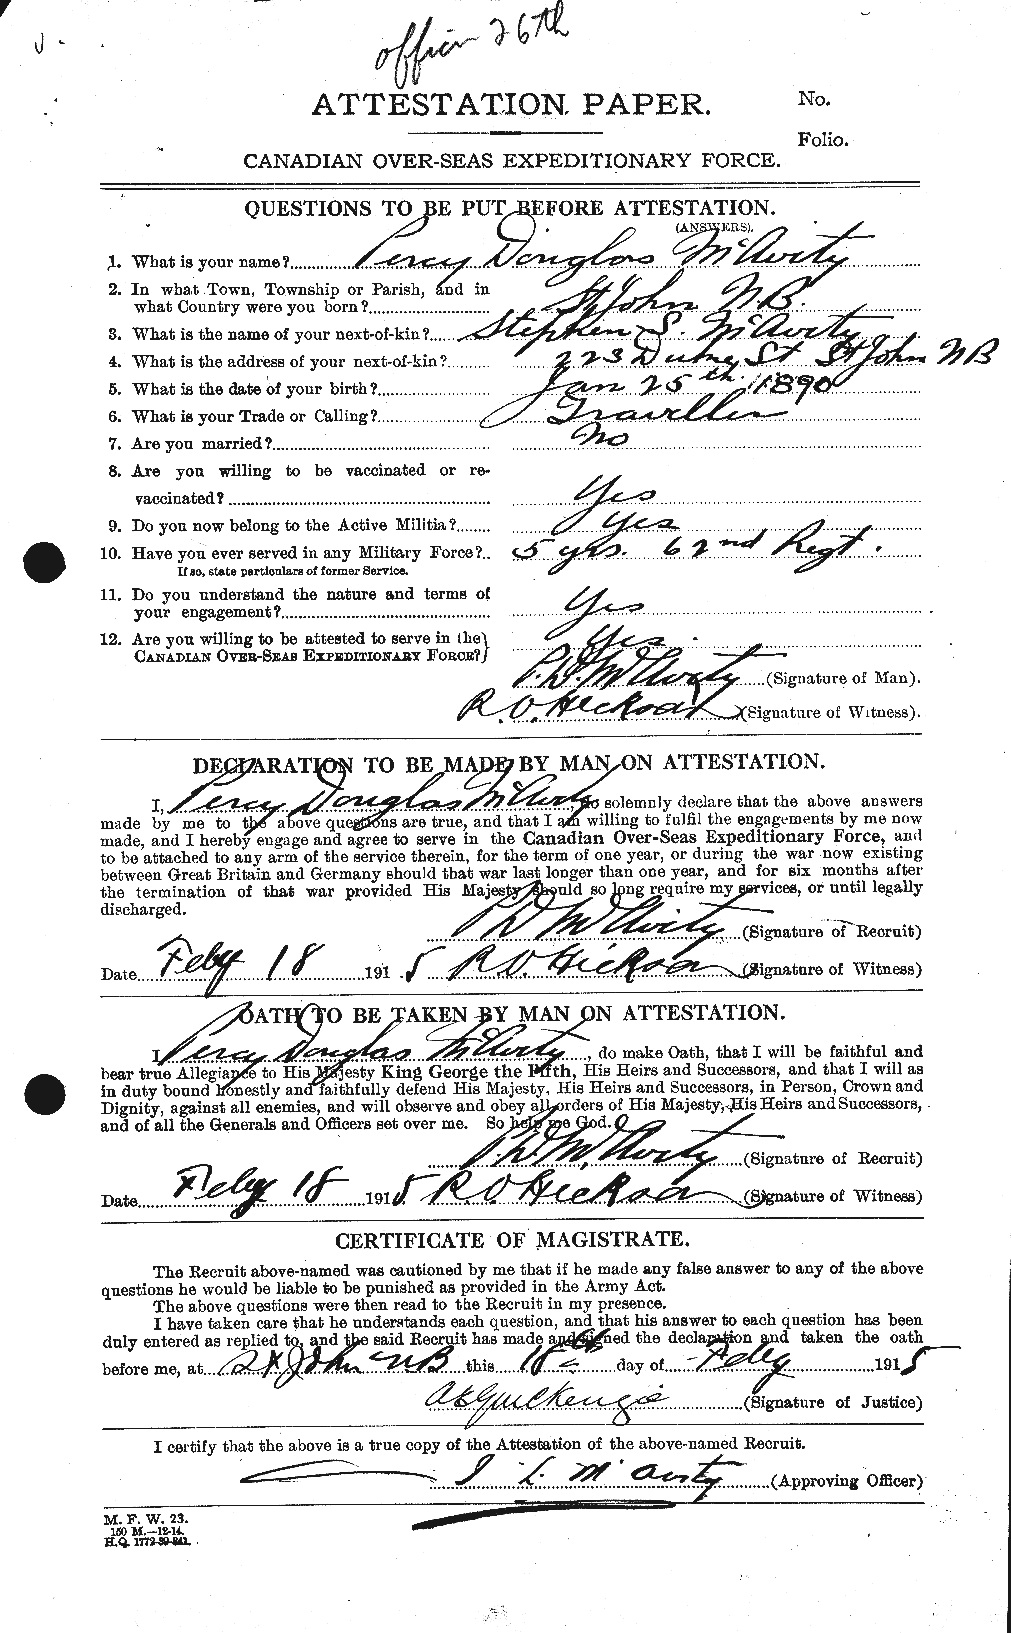 Personnel Records of the First World War - CEF 130042a